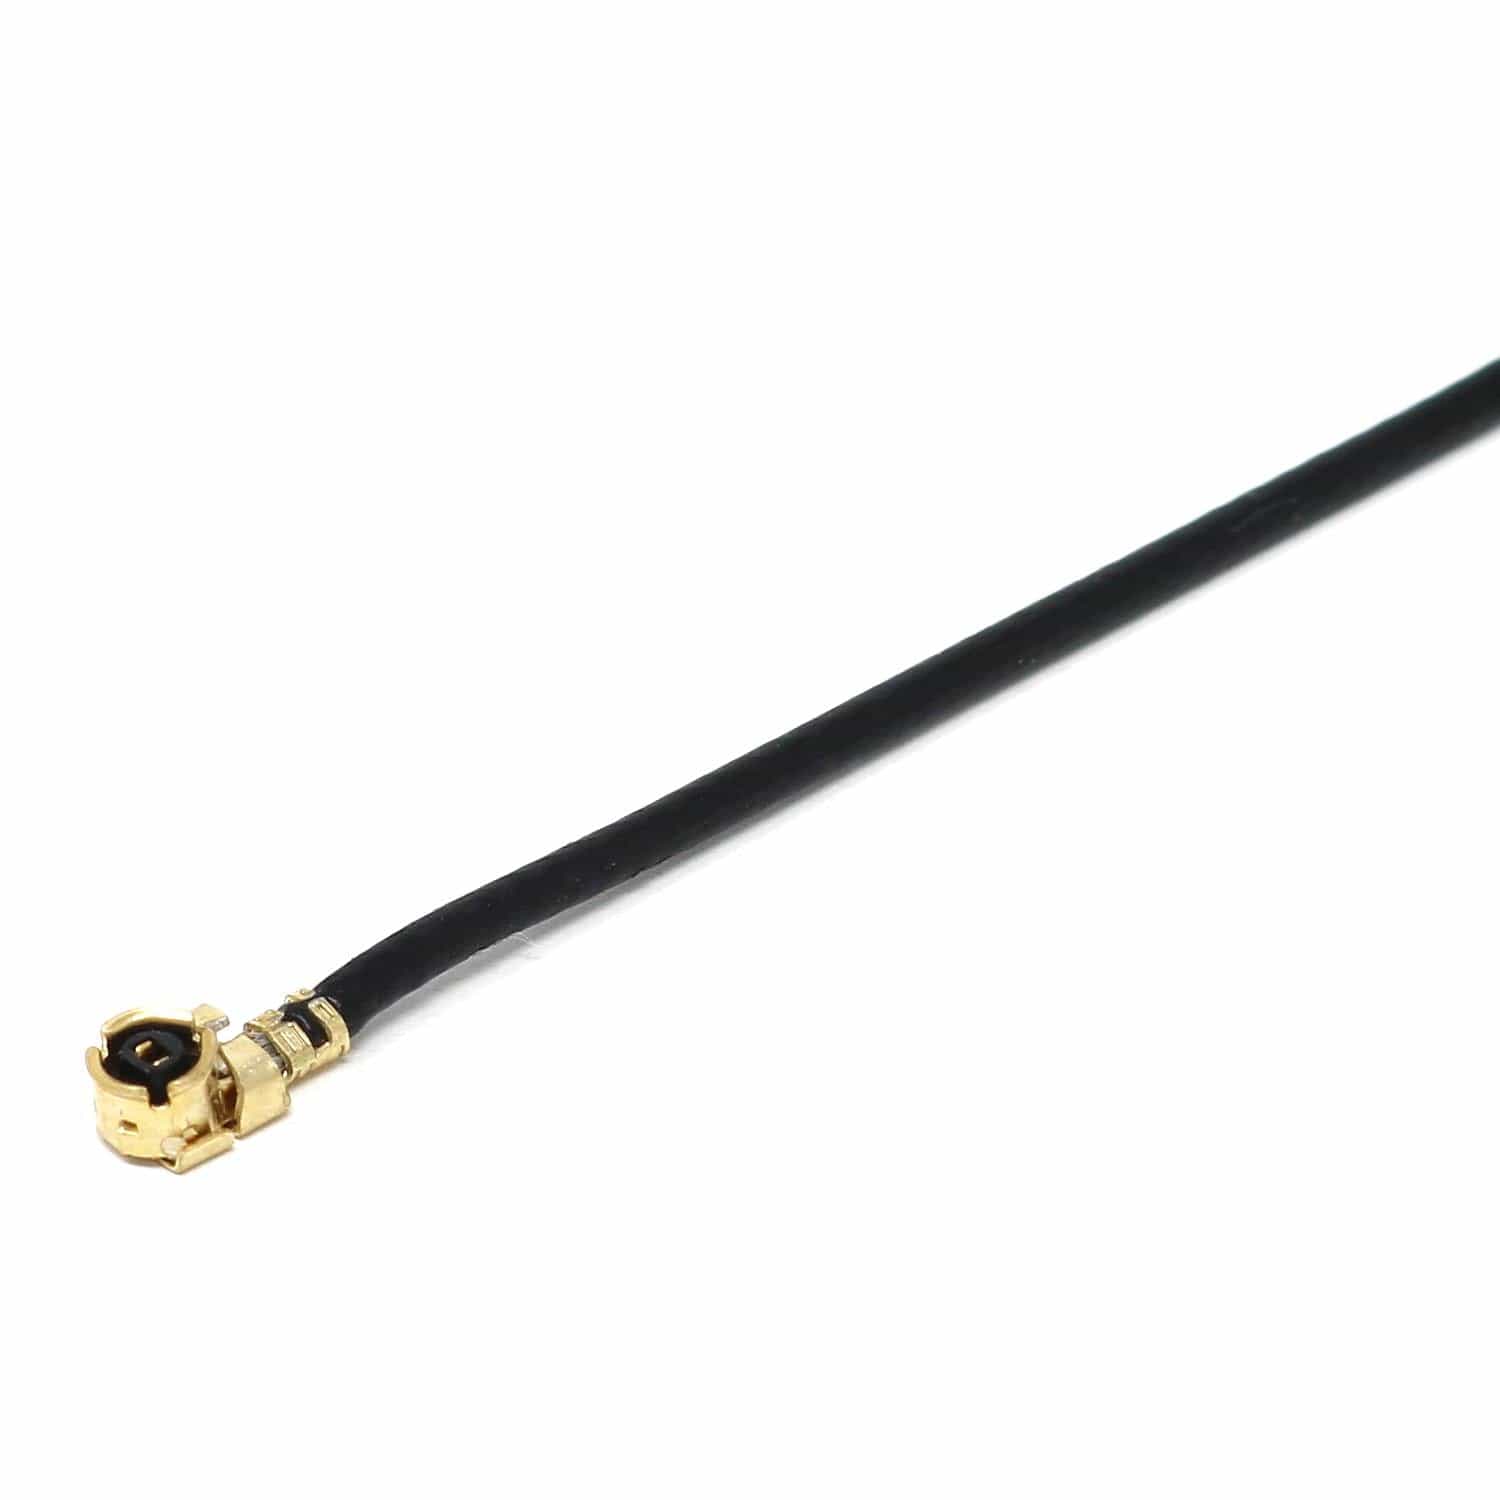 LoRa Antenna with Pigtail - 915MHz Black - The Pi Hut